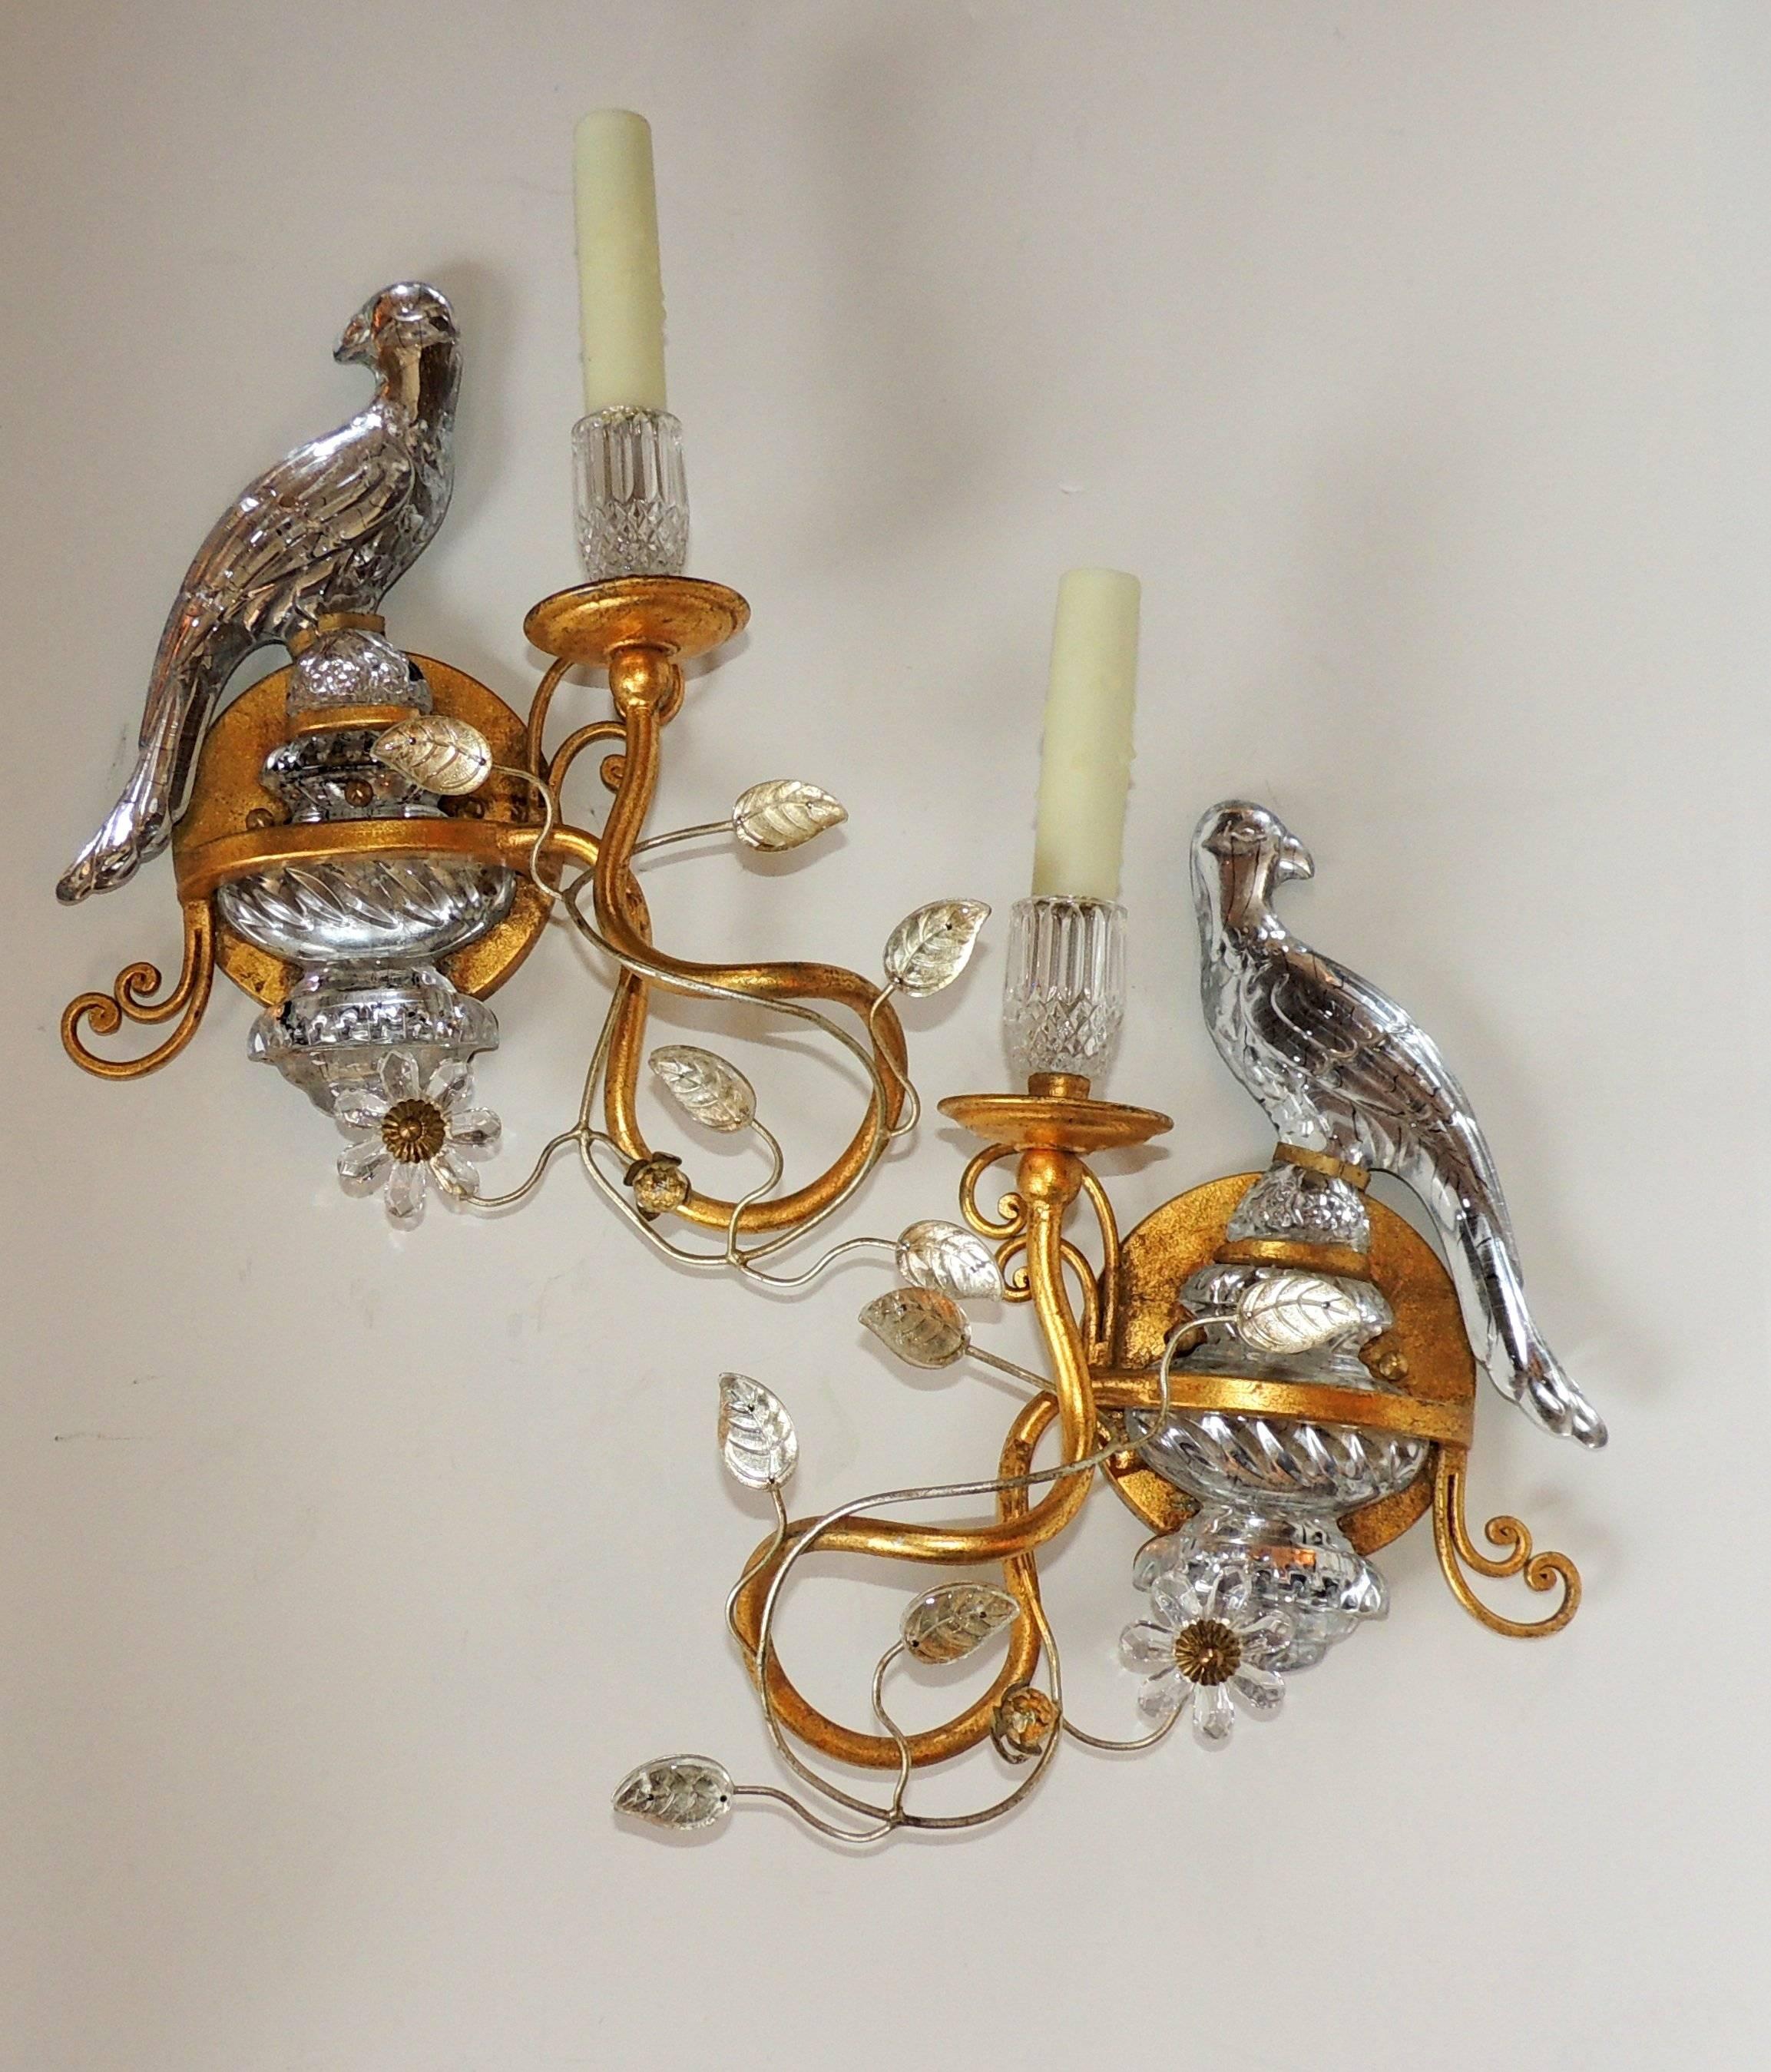 This endearing set of Bagues style vintage gilt and crystal sconces are beautifully balanced with leaves and the crystal urn the bird is sitting on. Simple crystal bobeches set off the crystal candle cup sitting next to the bird. There is a right